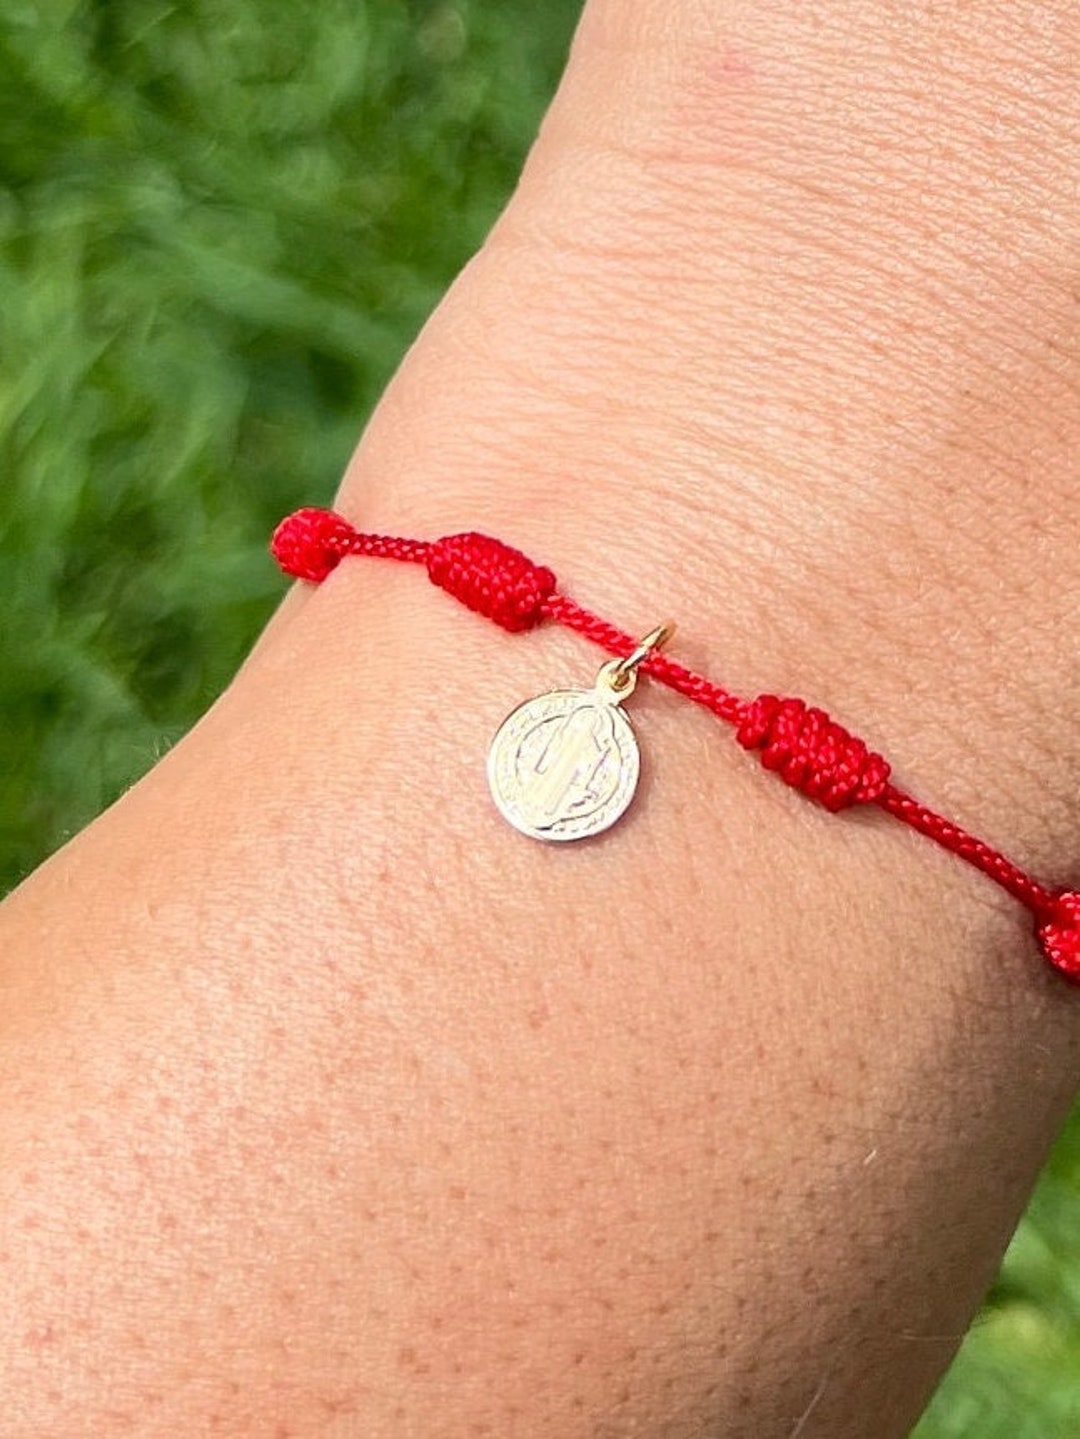 Buy Red cord Bracelet for Men String - Adjustable Bracelet for Women -  Unisex Adult Waterproof Nylon Cord Surfer Passion protection strength Power  Talisman Good Luck Charm Energy Red String of Fate